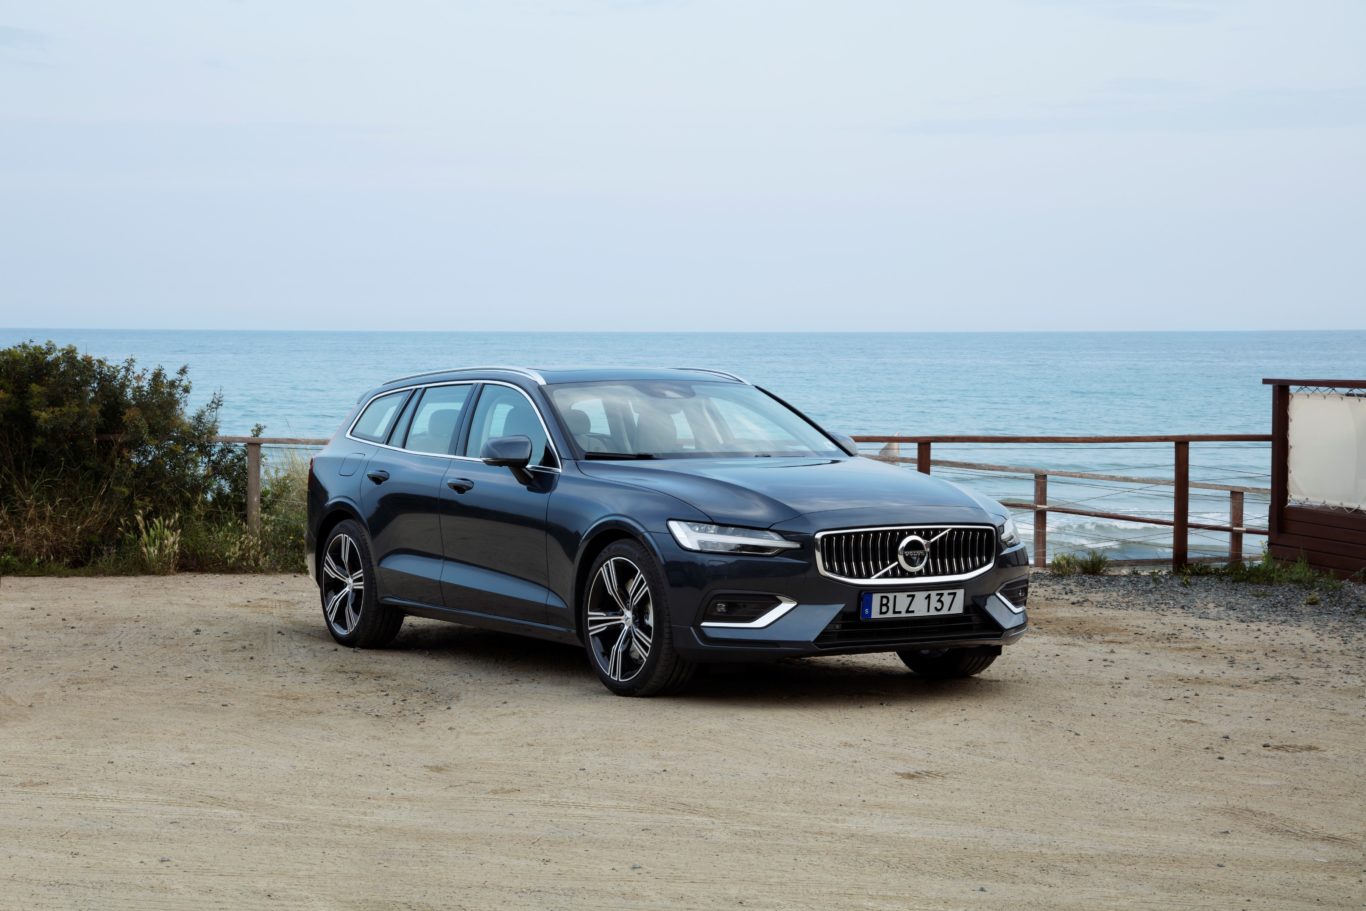 The V60 is offered with a range of petrol, diesel and hybrid engines